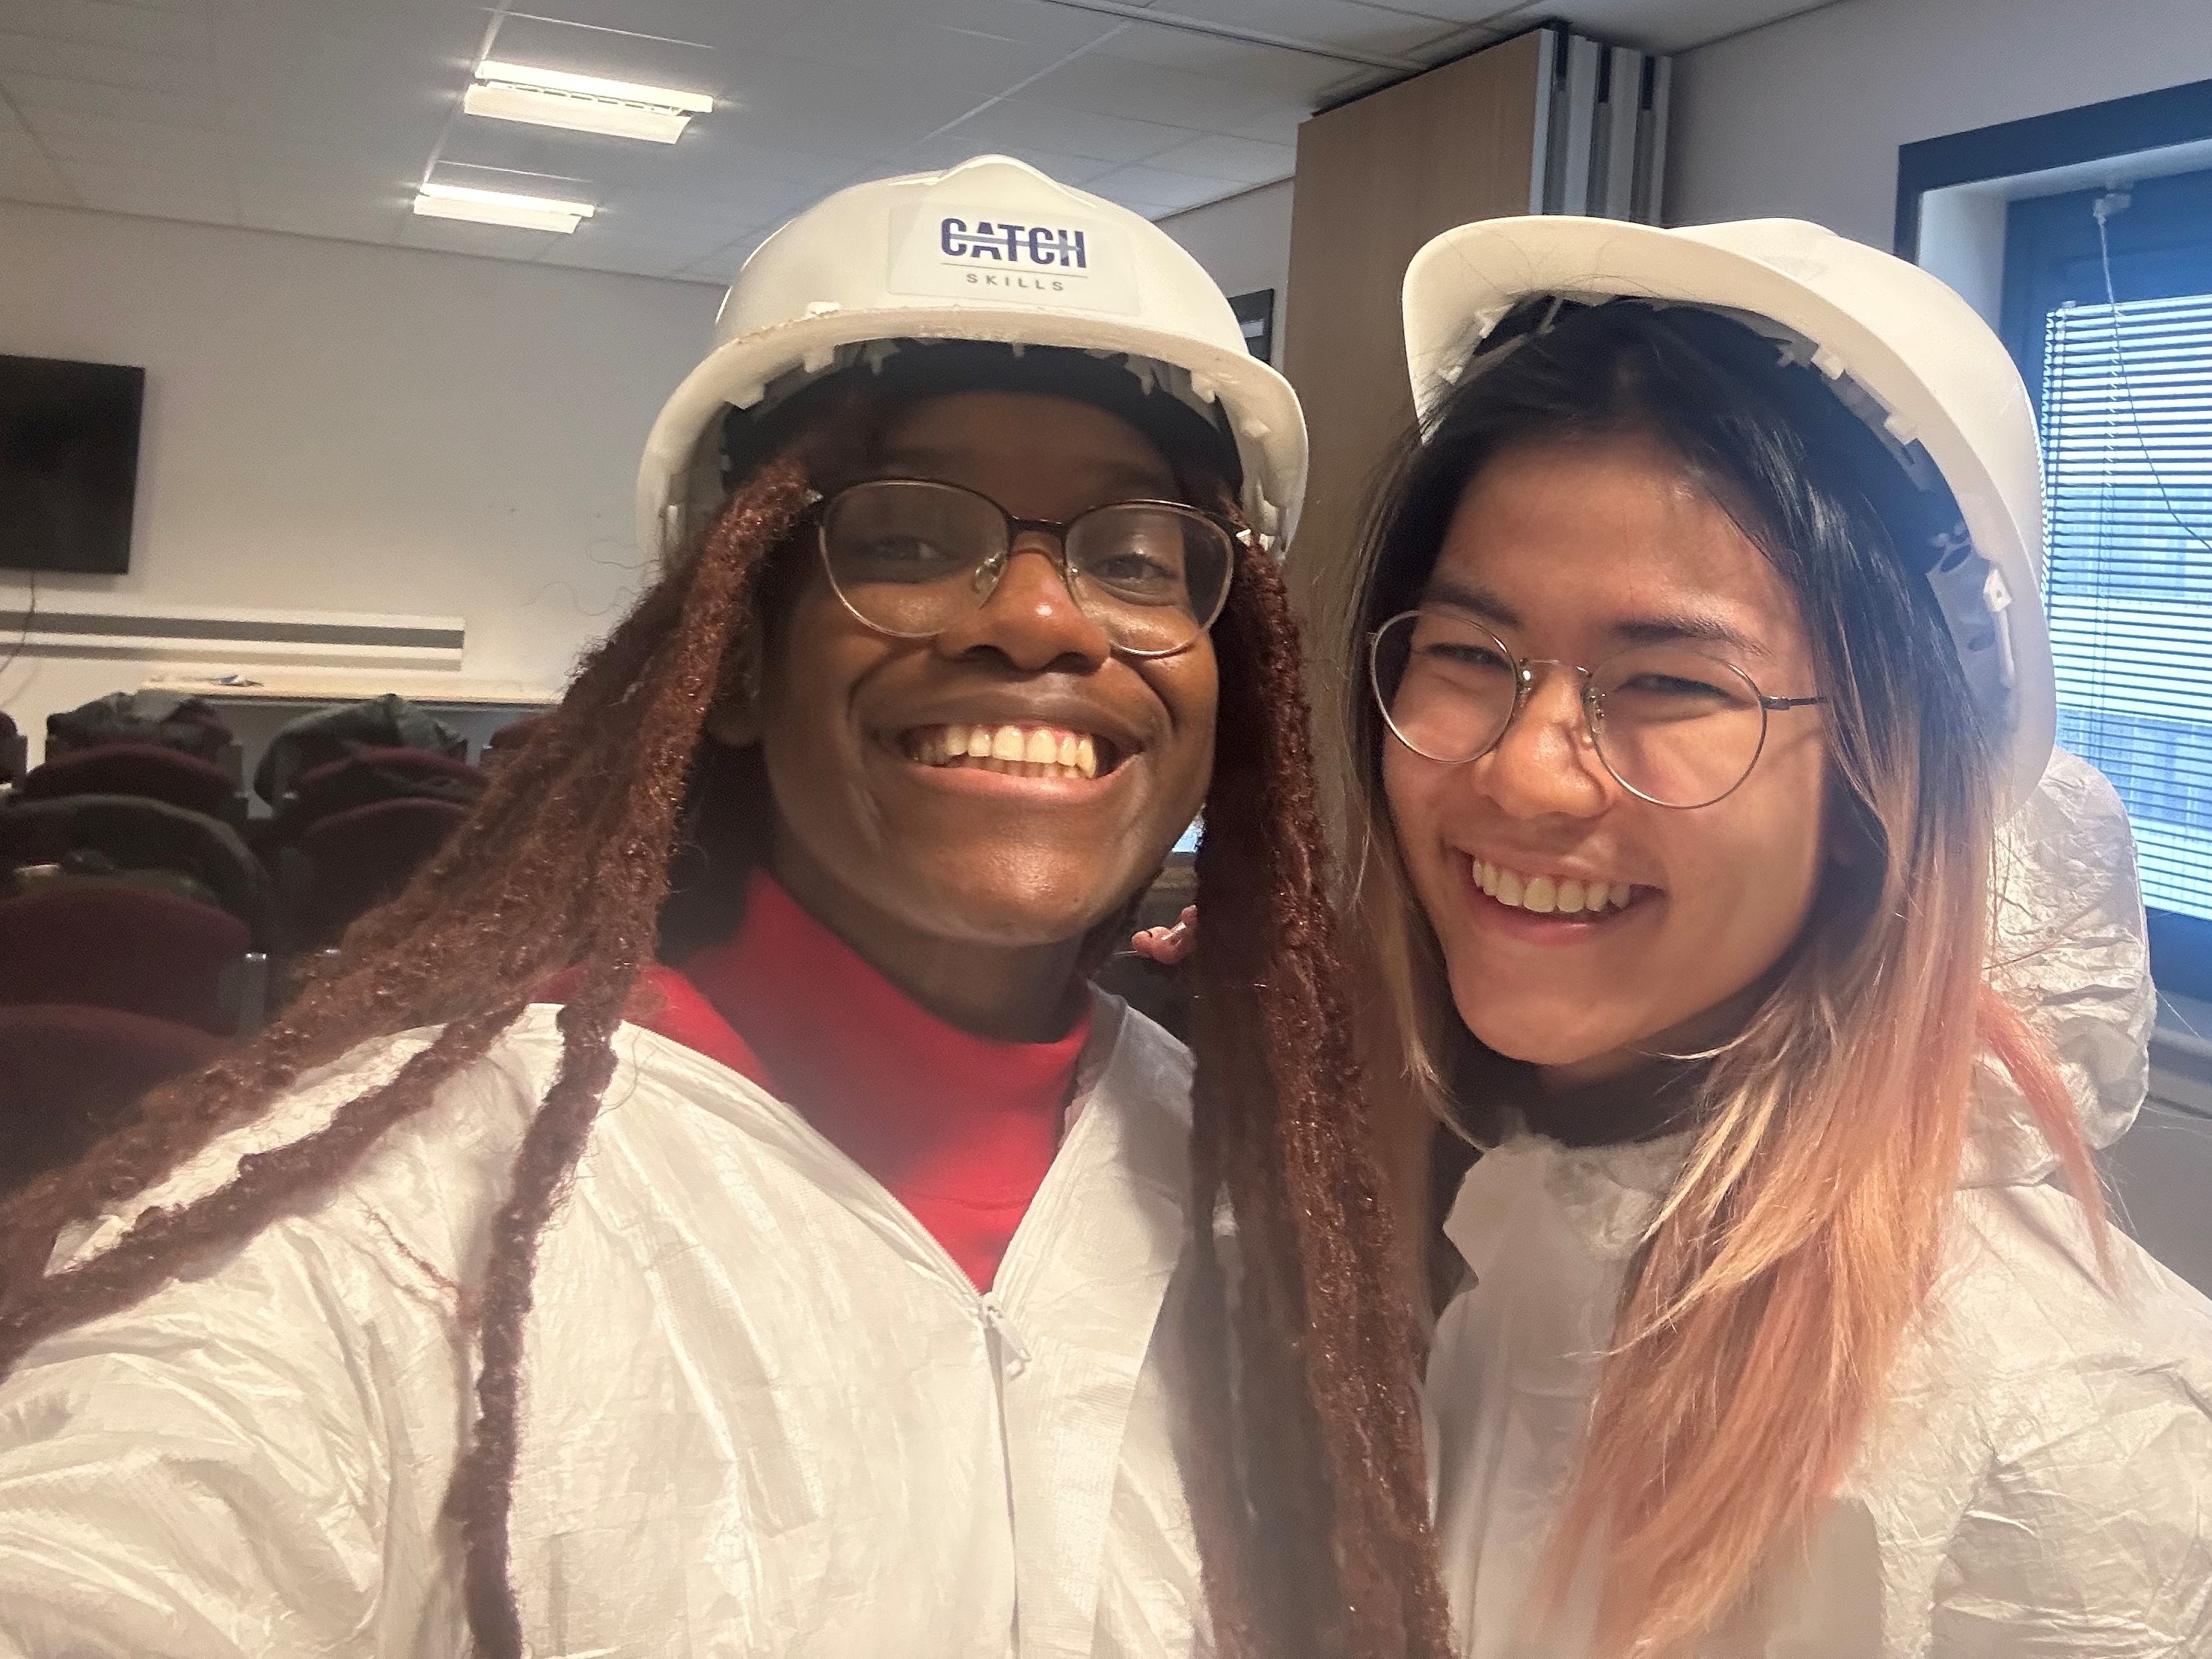 Rafaela with a friend on the field trip wearing safety clothing